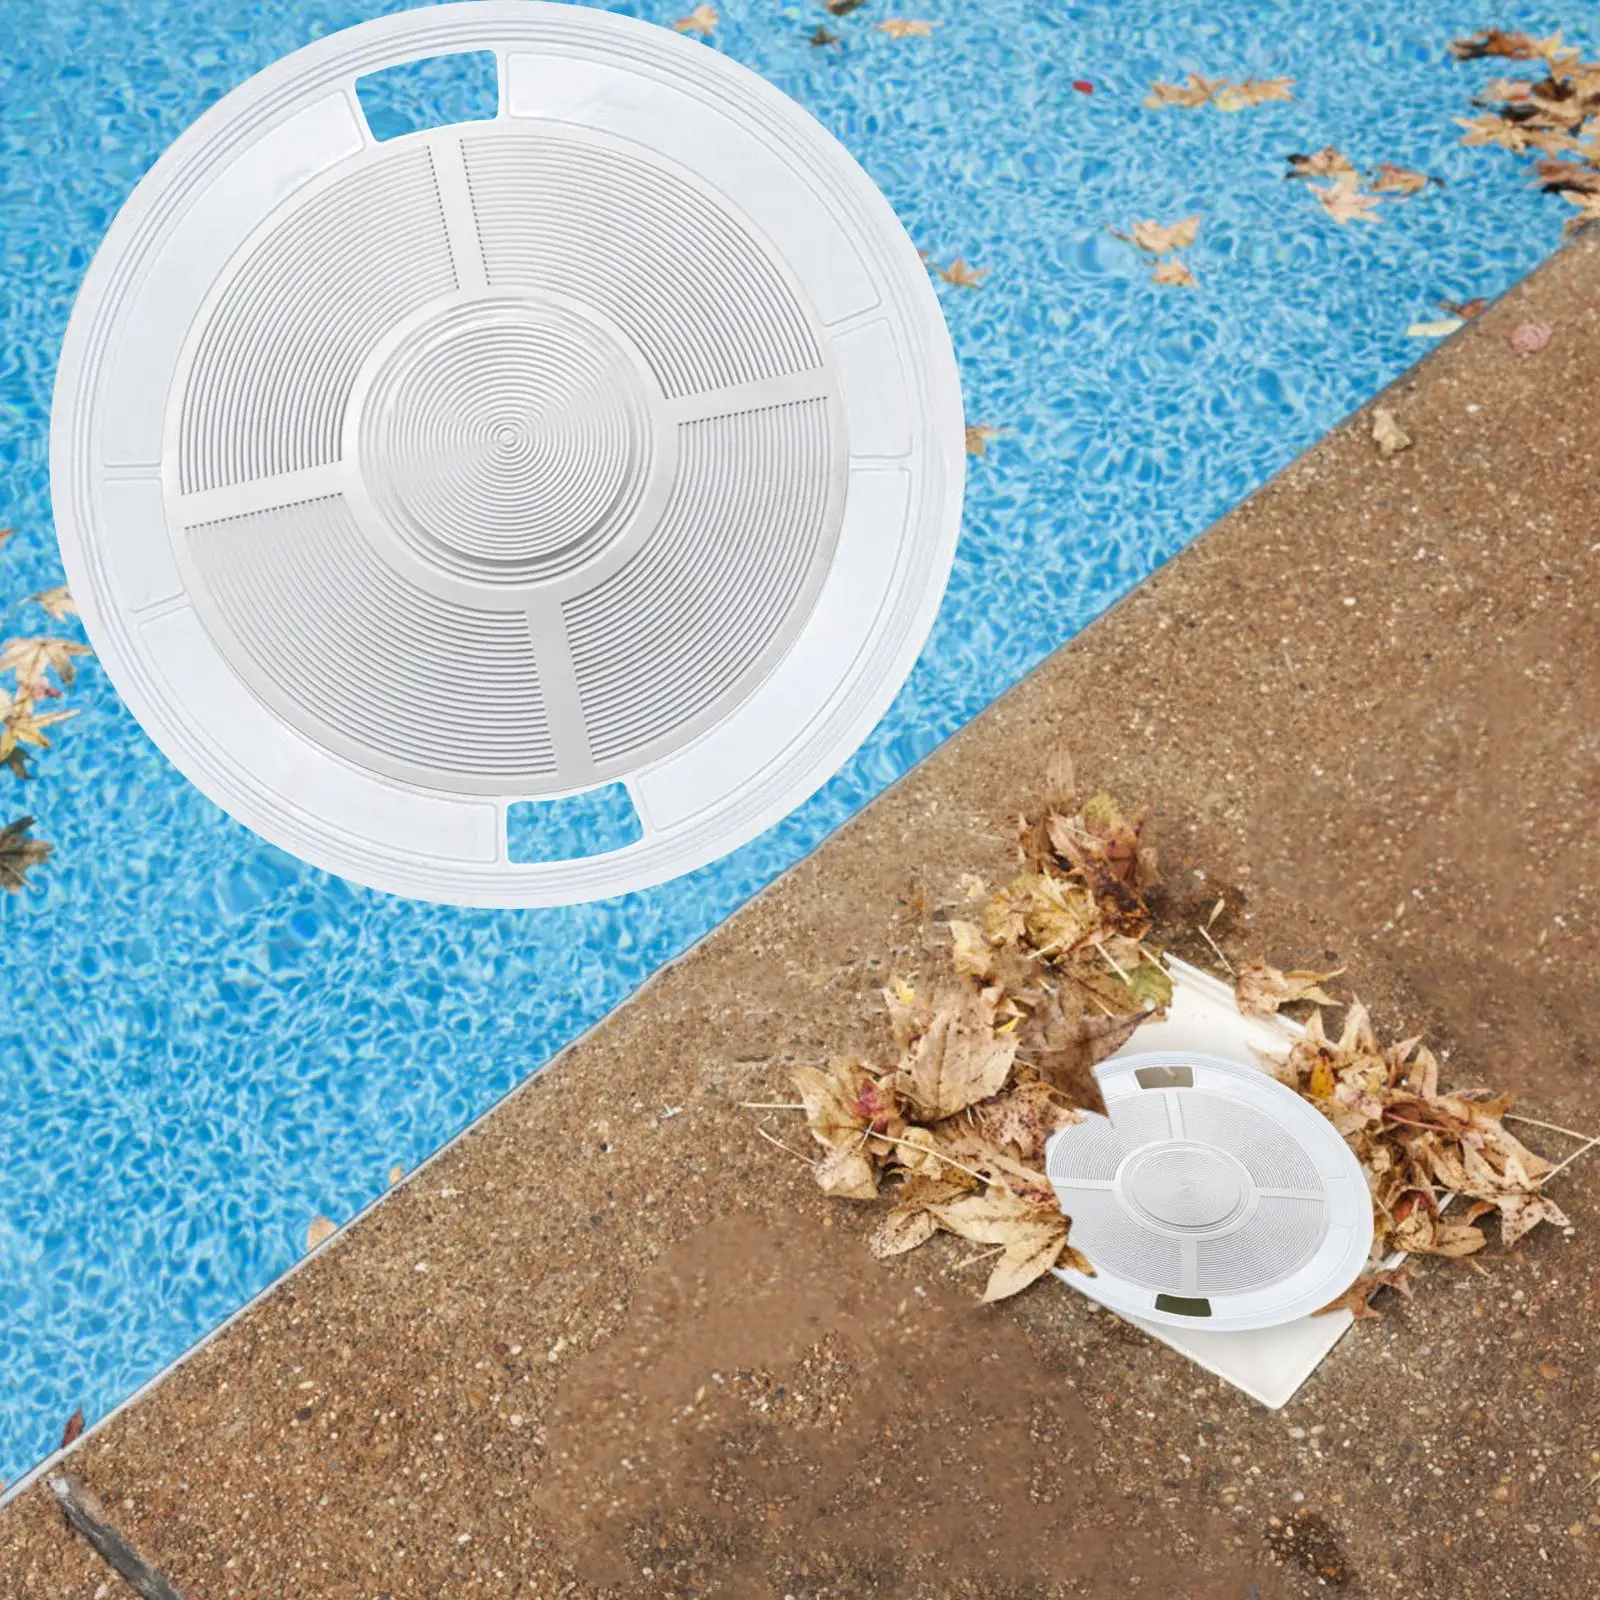 Pool Skimmer Lid Round Professional Spare Part 23.5cm Diameter Effective Durable Accessories Skimmer Cover for SP1091LX Skimmer